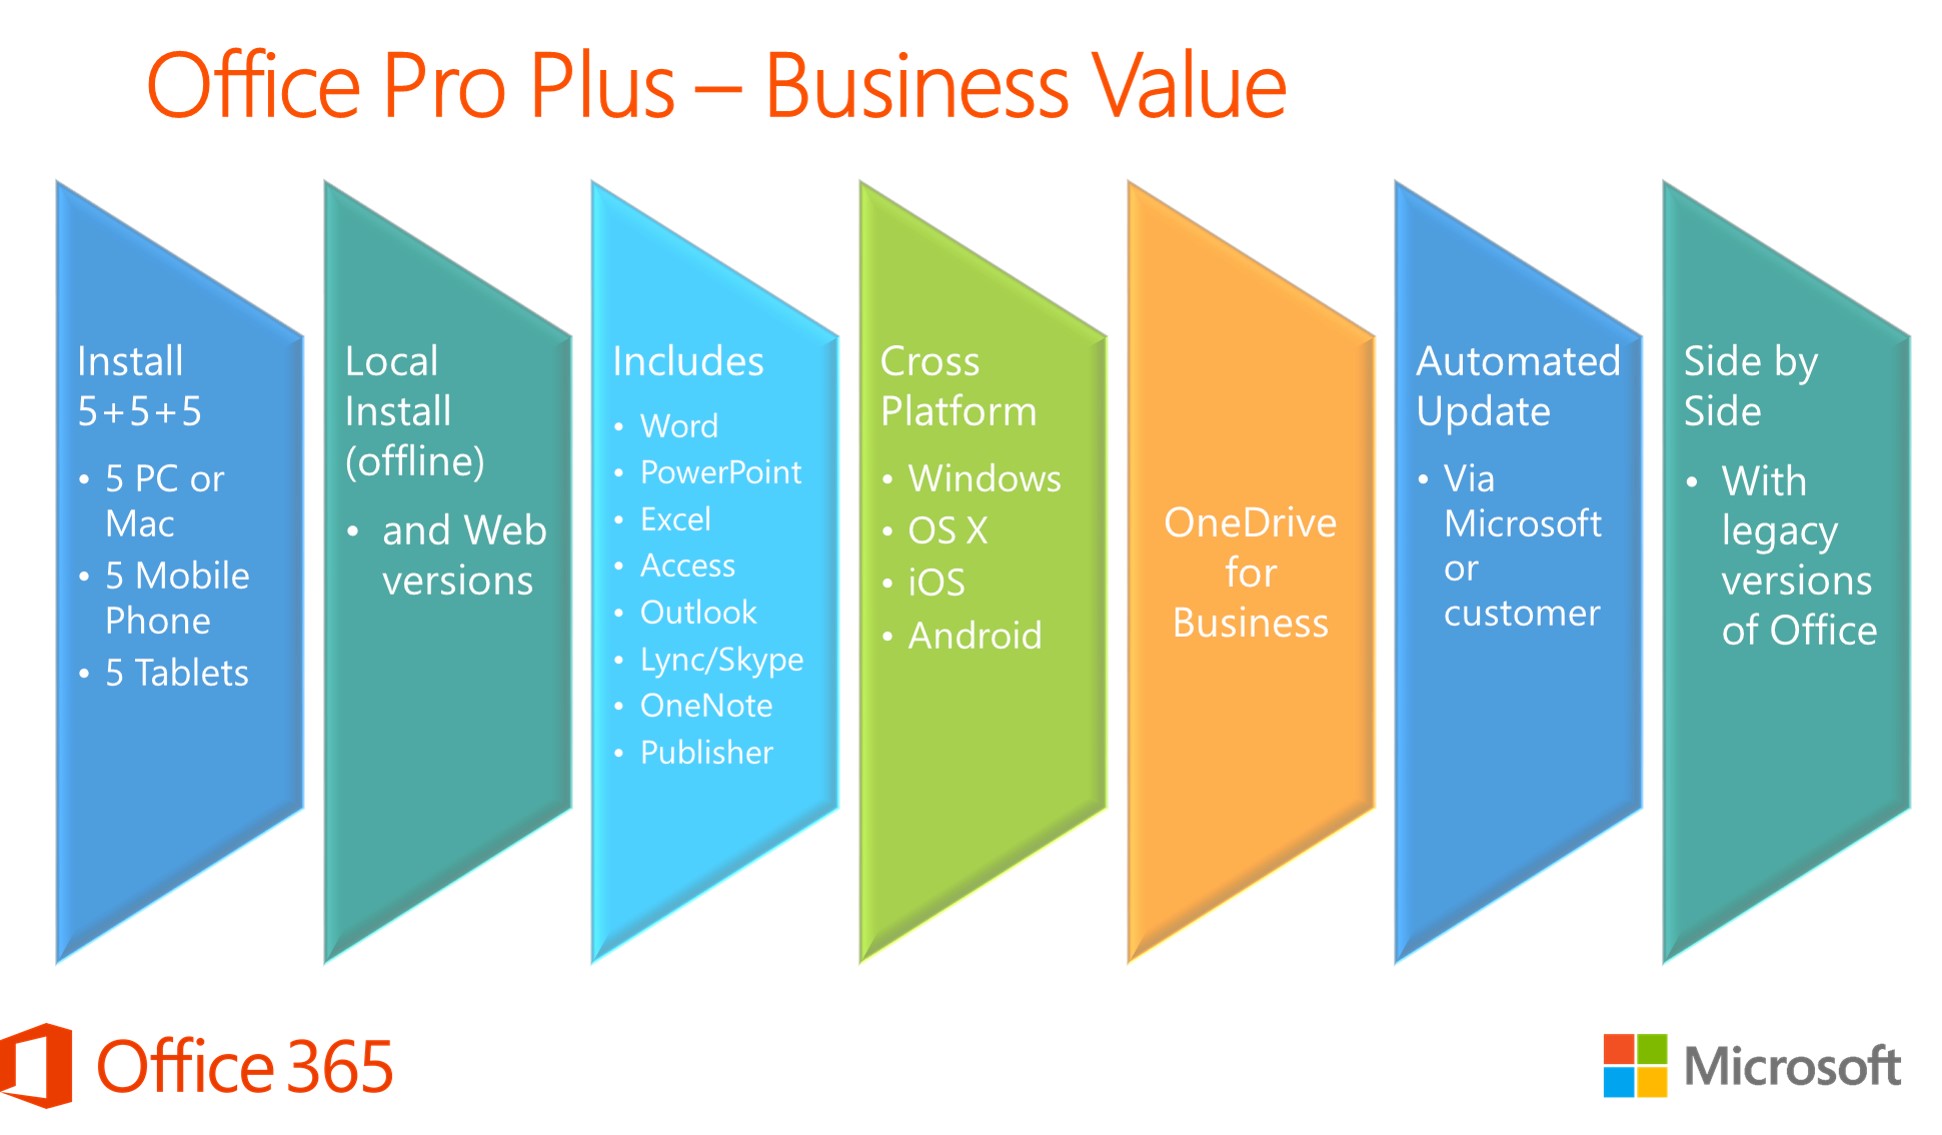 What is the difference between Office 365 business and Office 365 Pro Plus?